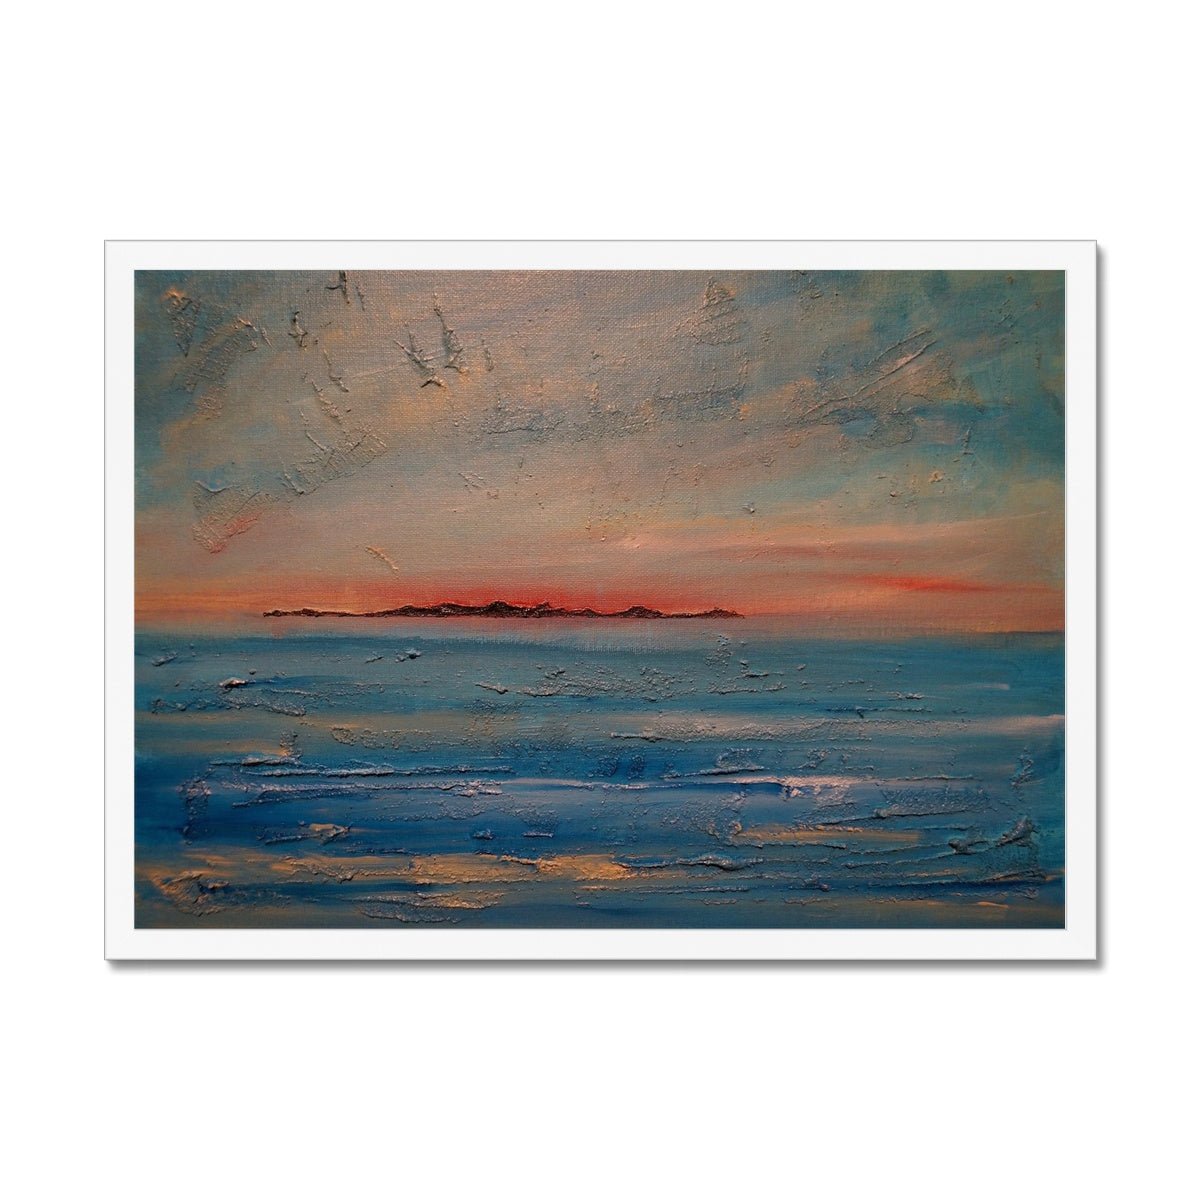 Gigha Sunset Painting | Framed Prints From Scotland-Framed Prints-Hebridean Islands Art Gallery-A2 Landscape-White Frame-Paintings, Prints, Homeware, Art Gifts From Scotland By Scottish Artist Kevin Hunter